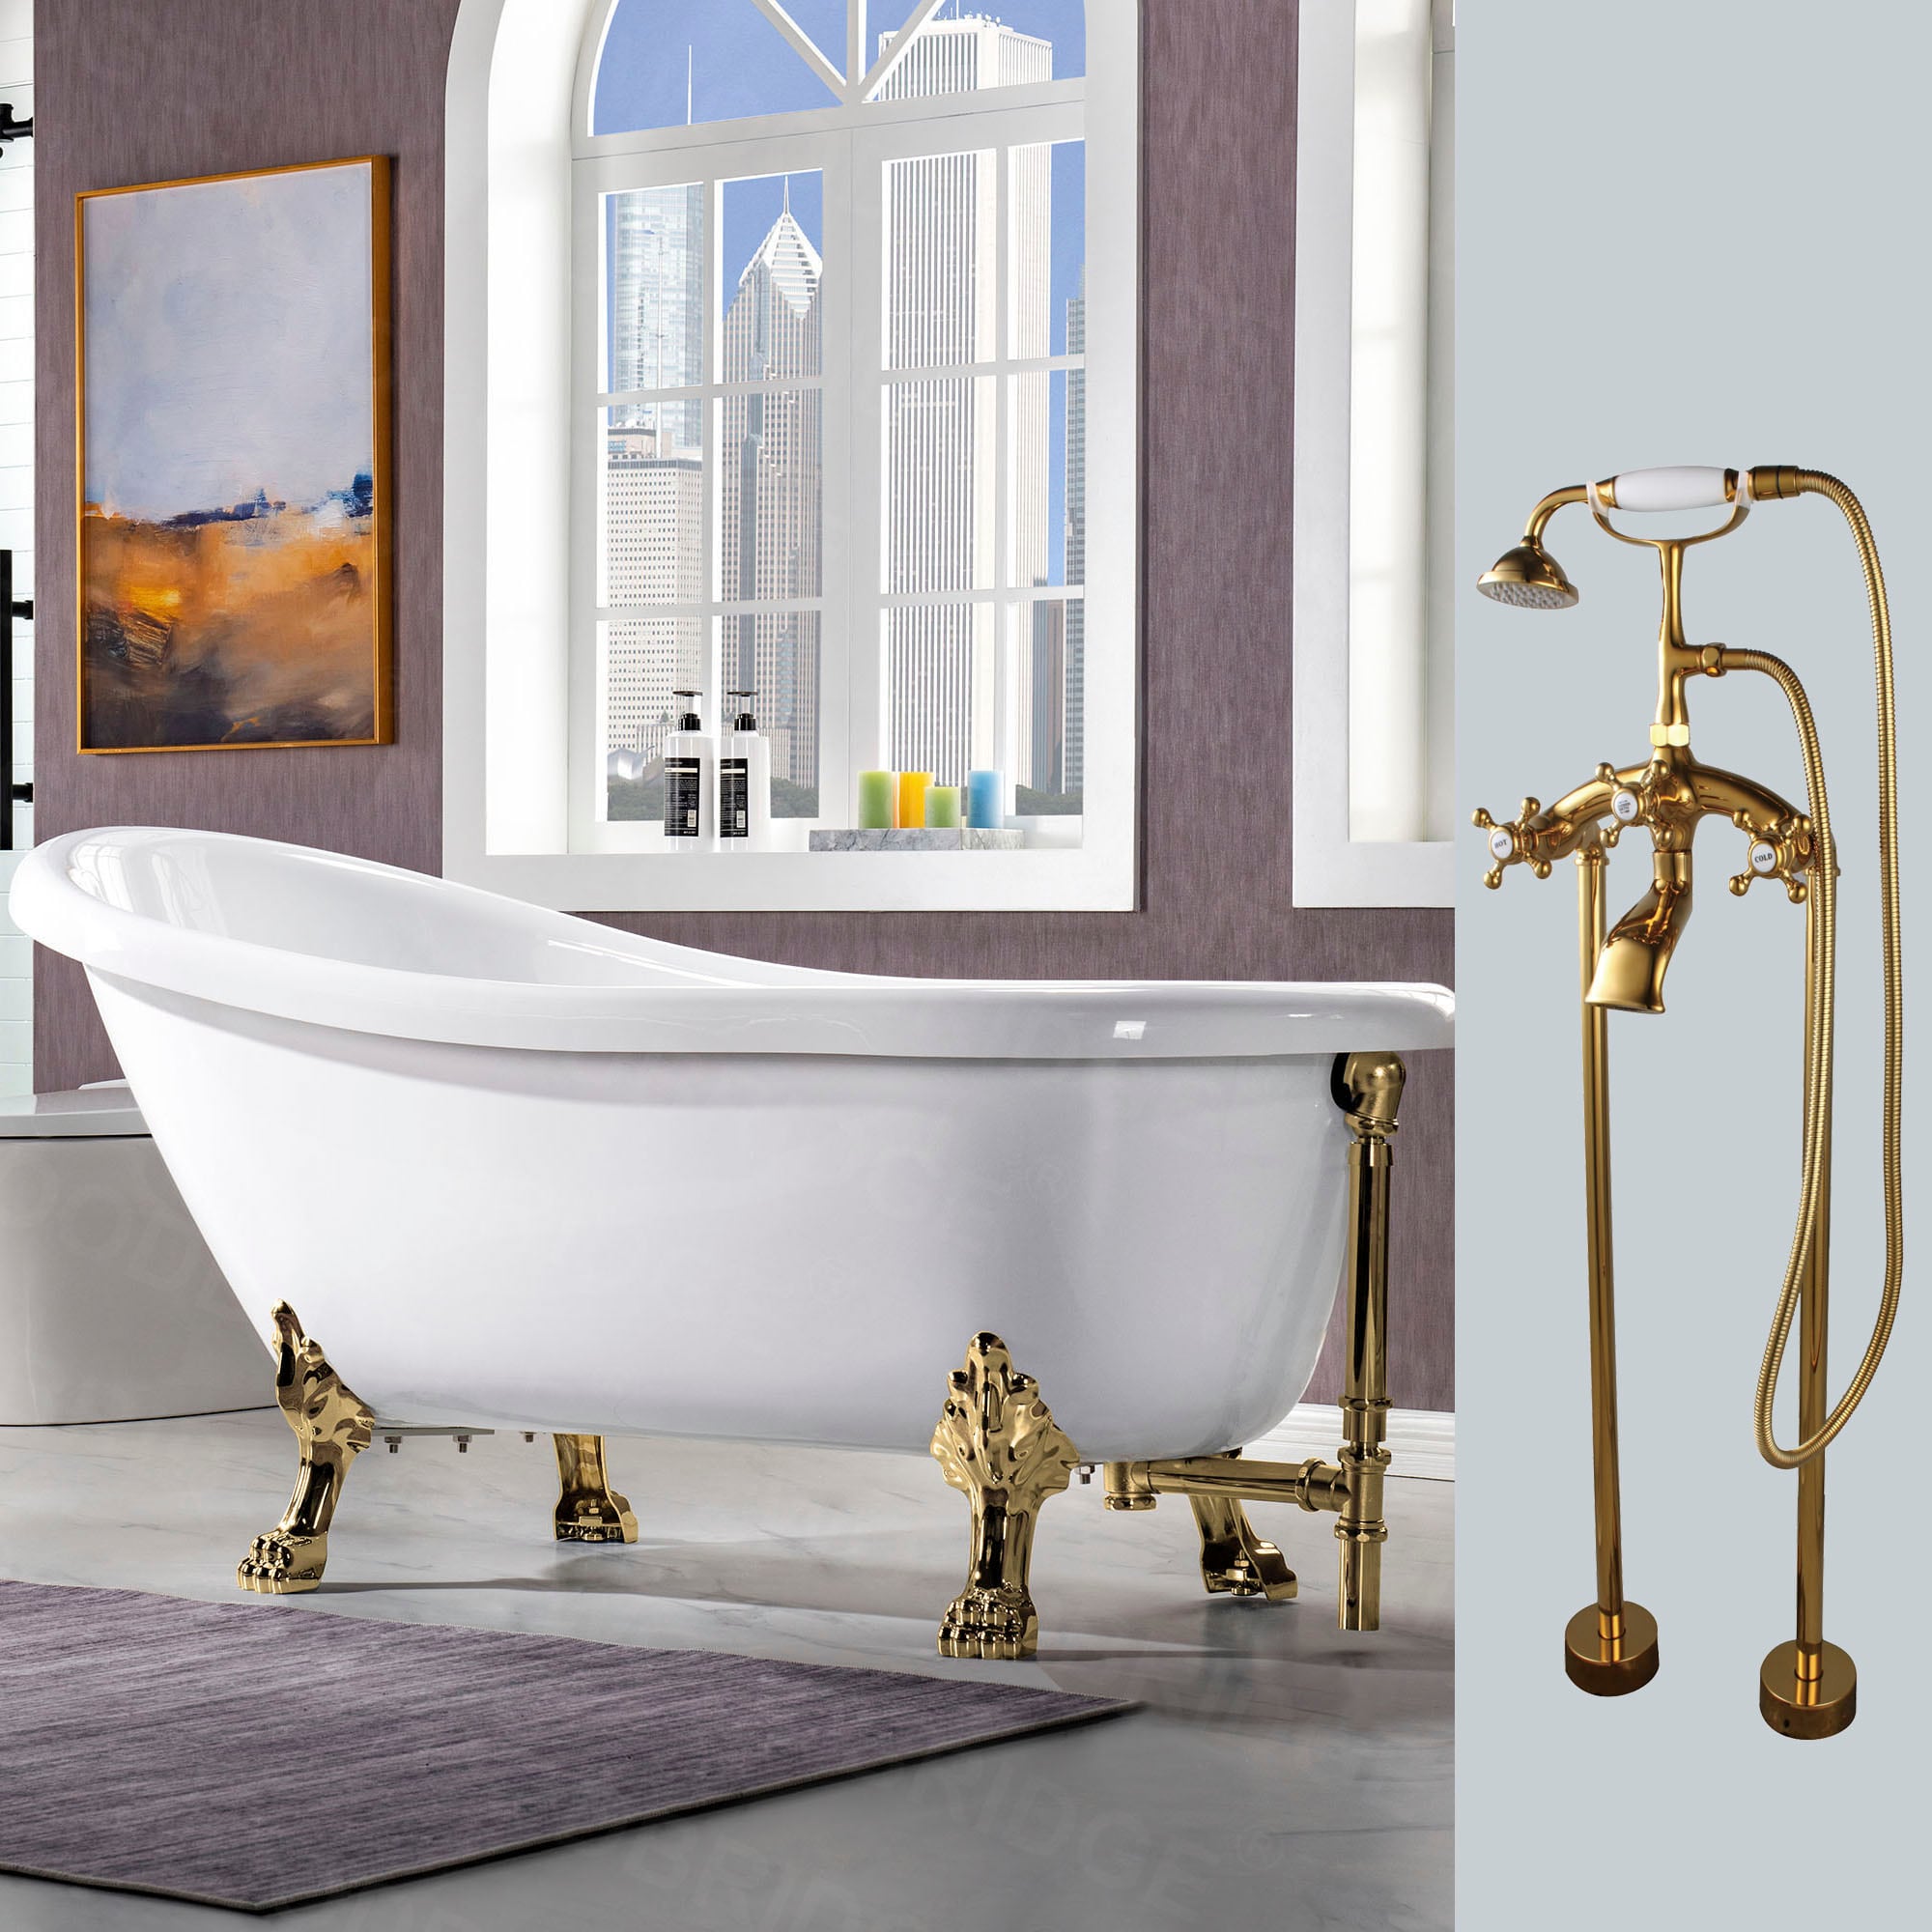 Salem 29.875-in x 67-in White with Gold Trim Acrylic Oval Clawfoot Soaking Bathtub with Faucet and Drain (Reversible Drain) | - Woodbridge LB389